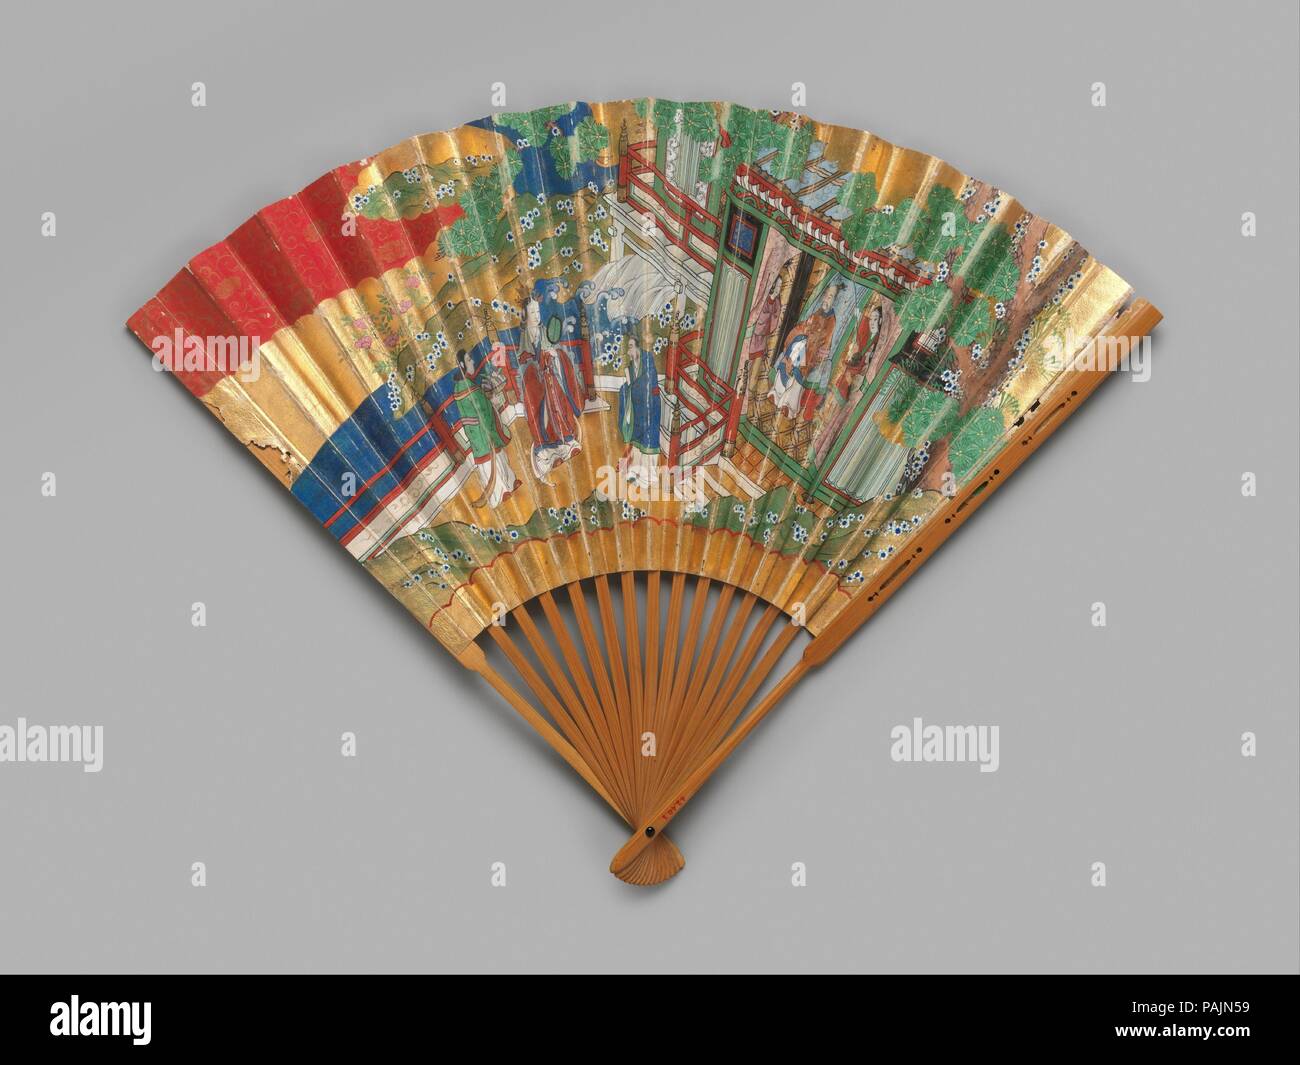 Chukei Fan. Culture: Japan. Dimensions: 13 1/4 × 19 in. (33.7 × 48.3 cm). Date: 19th century.  In the refined and simplified performances of the Noh theater, the fan plays an important role in delineating character. The design, colors of the ground and color of the lacquer on the bamboo frame vary, depending on the role being performed. Cherry blossoms and pine are depicted on one side of this fan, and the Queen of the West and the King of the East of Chinese legend appear on the reverse. The chukei fan which spreads out toward the top when closed, is appropriate for a female actor. Museum: Me Stock Photo